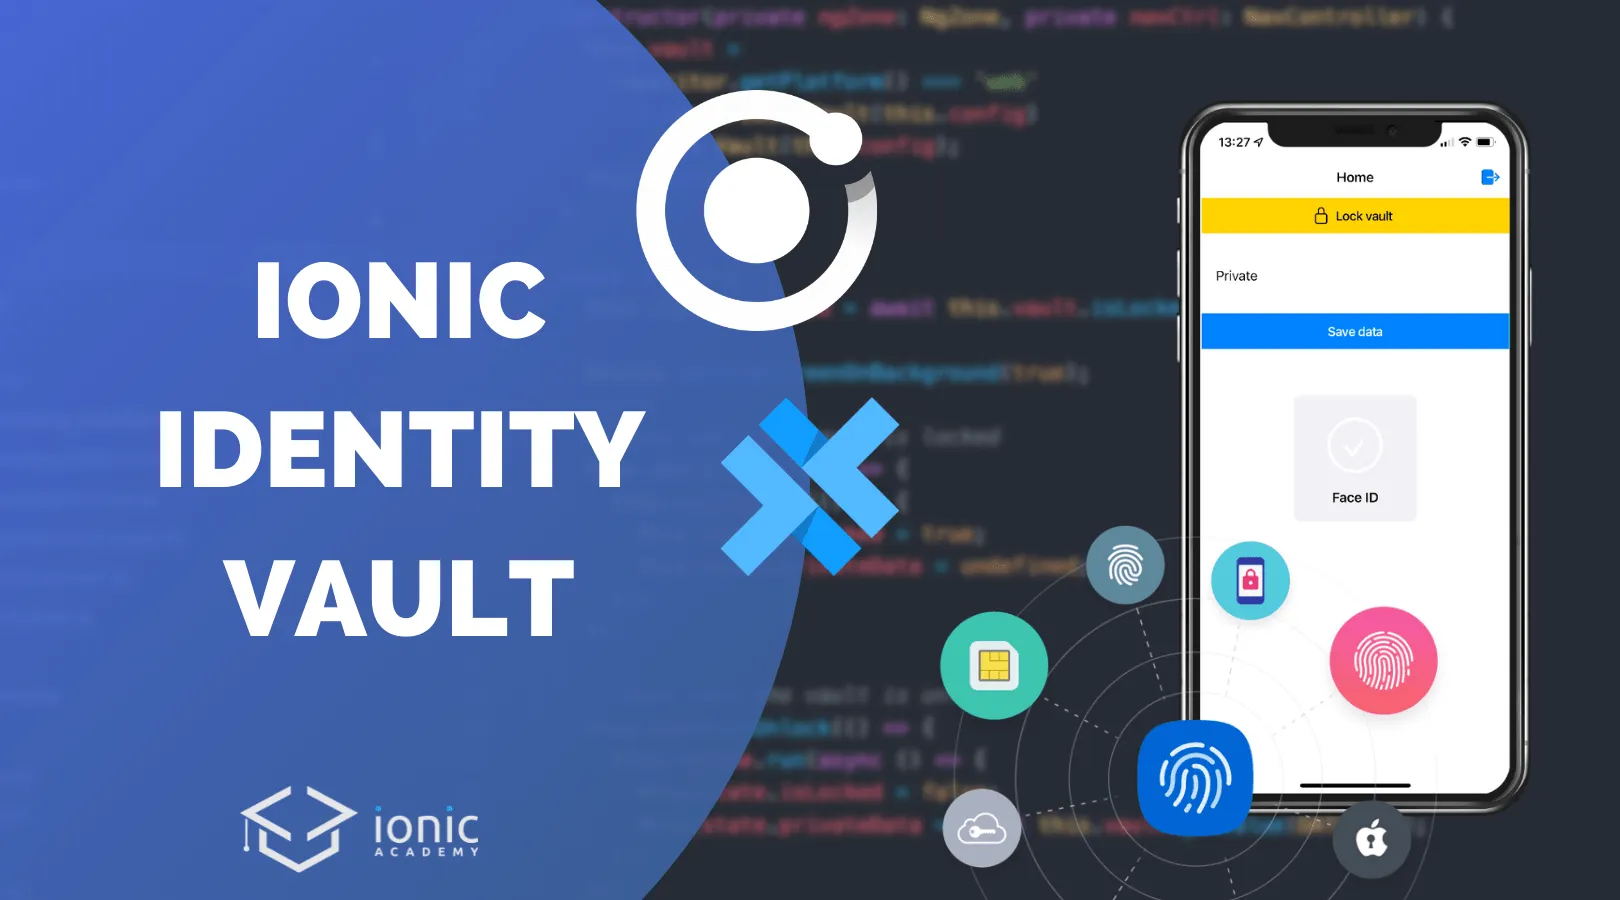 How to Secure your App with Ionic Identity Vault